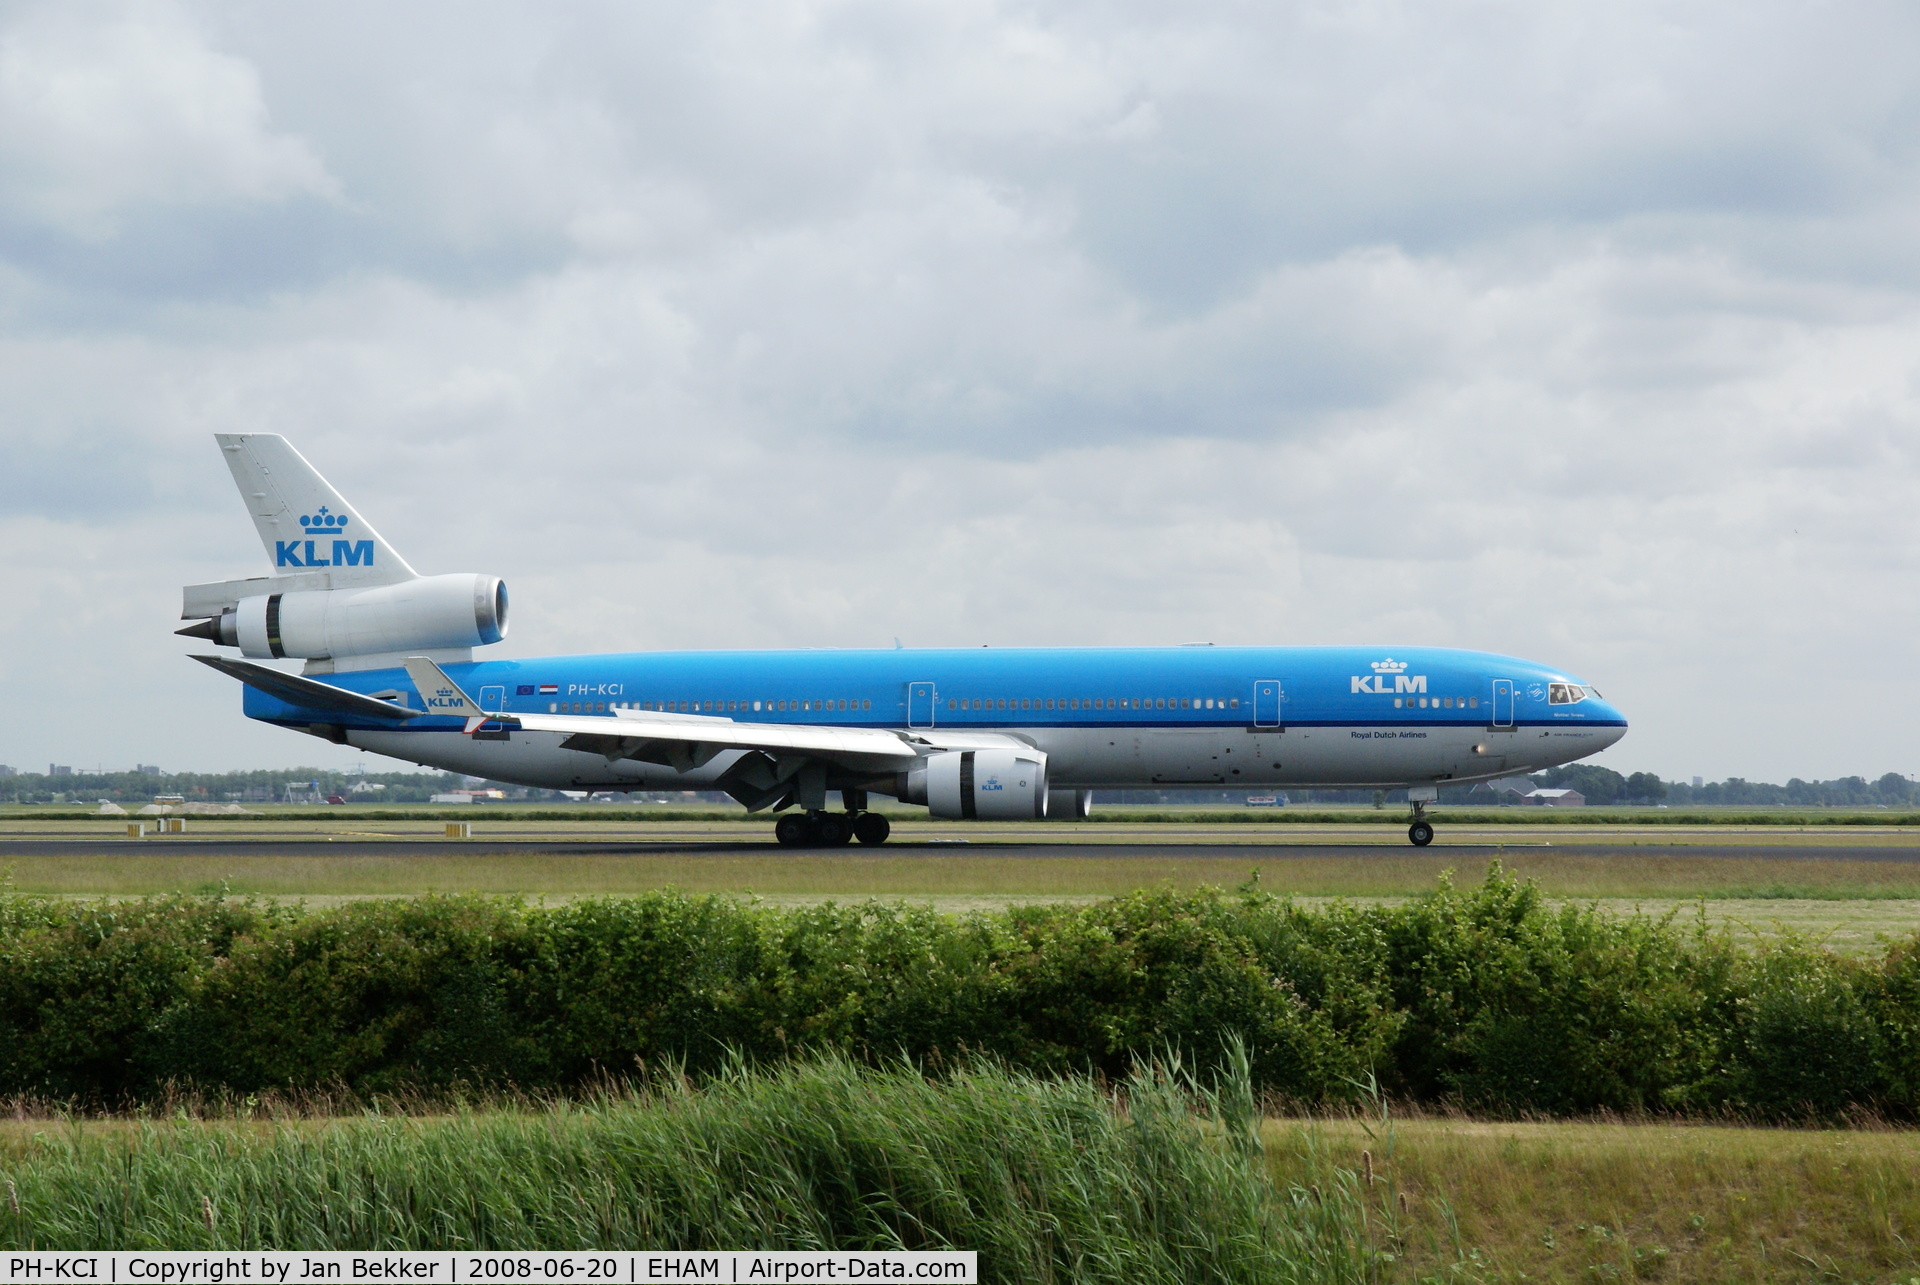 PH-KCI, 1995 McDonnell Douglas MD-11 C/N 48563, Just after landing on the Polderbaan at Schiphol